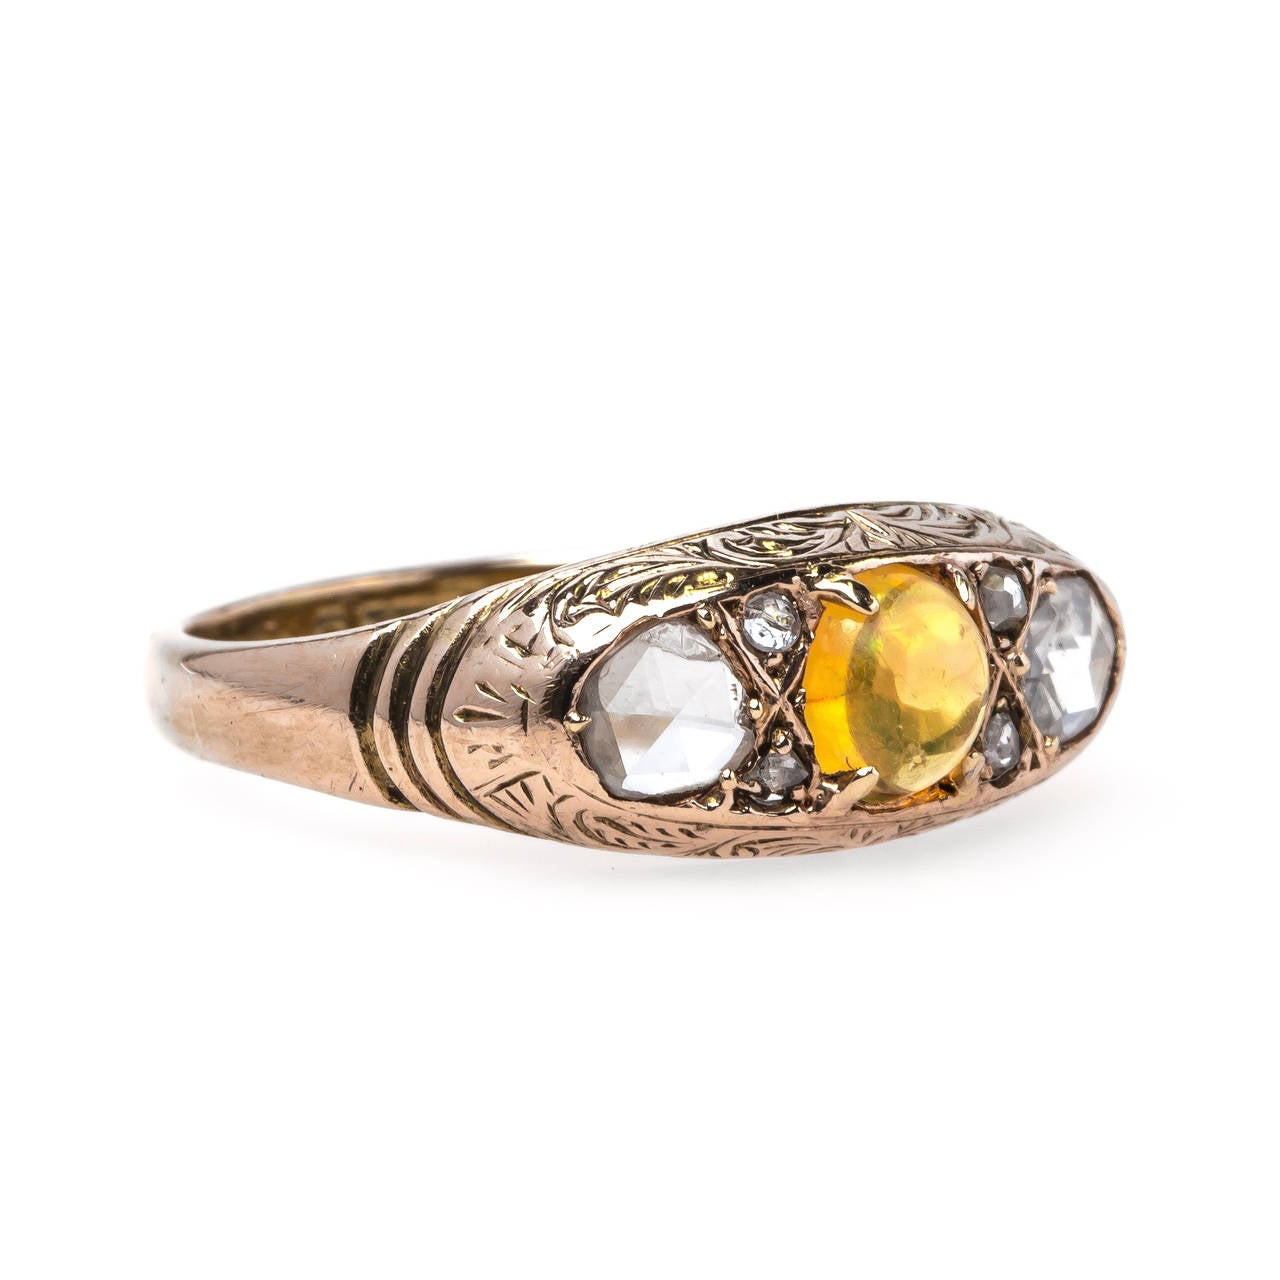 Louisville is a unique and delicate Victorian era (circa 1885) 9k rose gold ring centering a round cabochon bright orange fire opal gauged at 4.25mm in diameter and flanked on either side by six sparkling Rose Cut diamonds totaling approximately